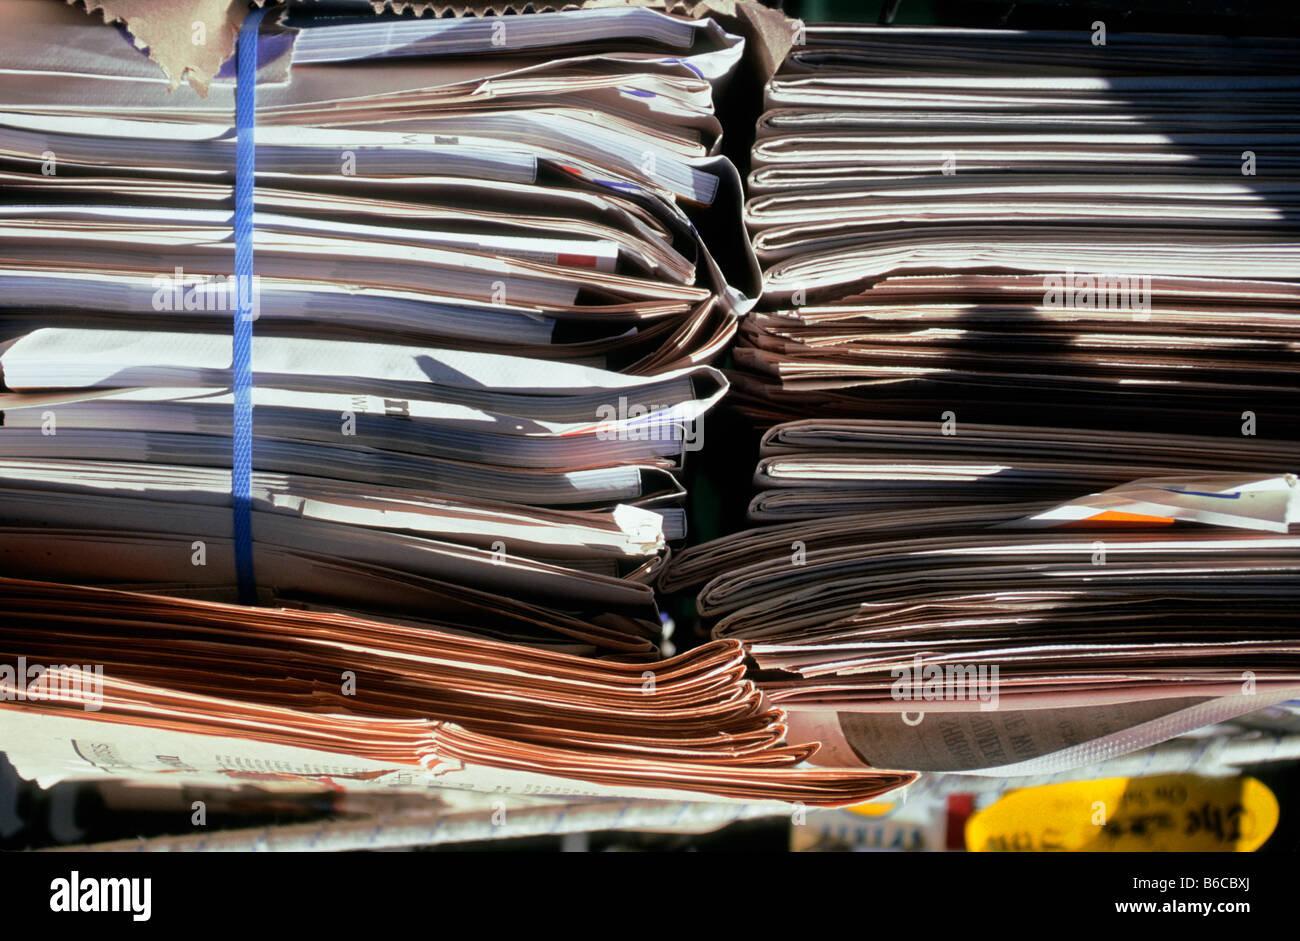 Stacks of bound newspapers tied up at newsstand waiting for pick up or delivery or recycling New York City, USA Stock Photo